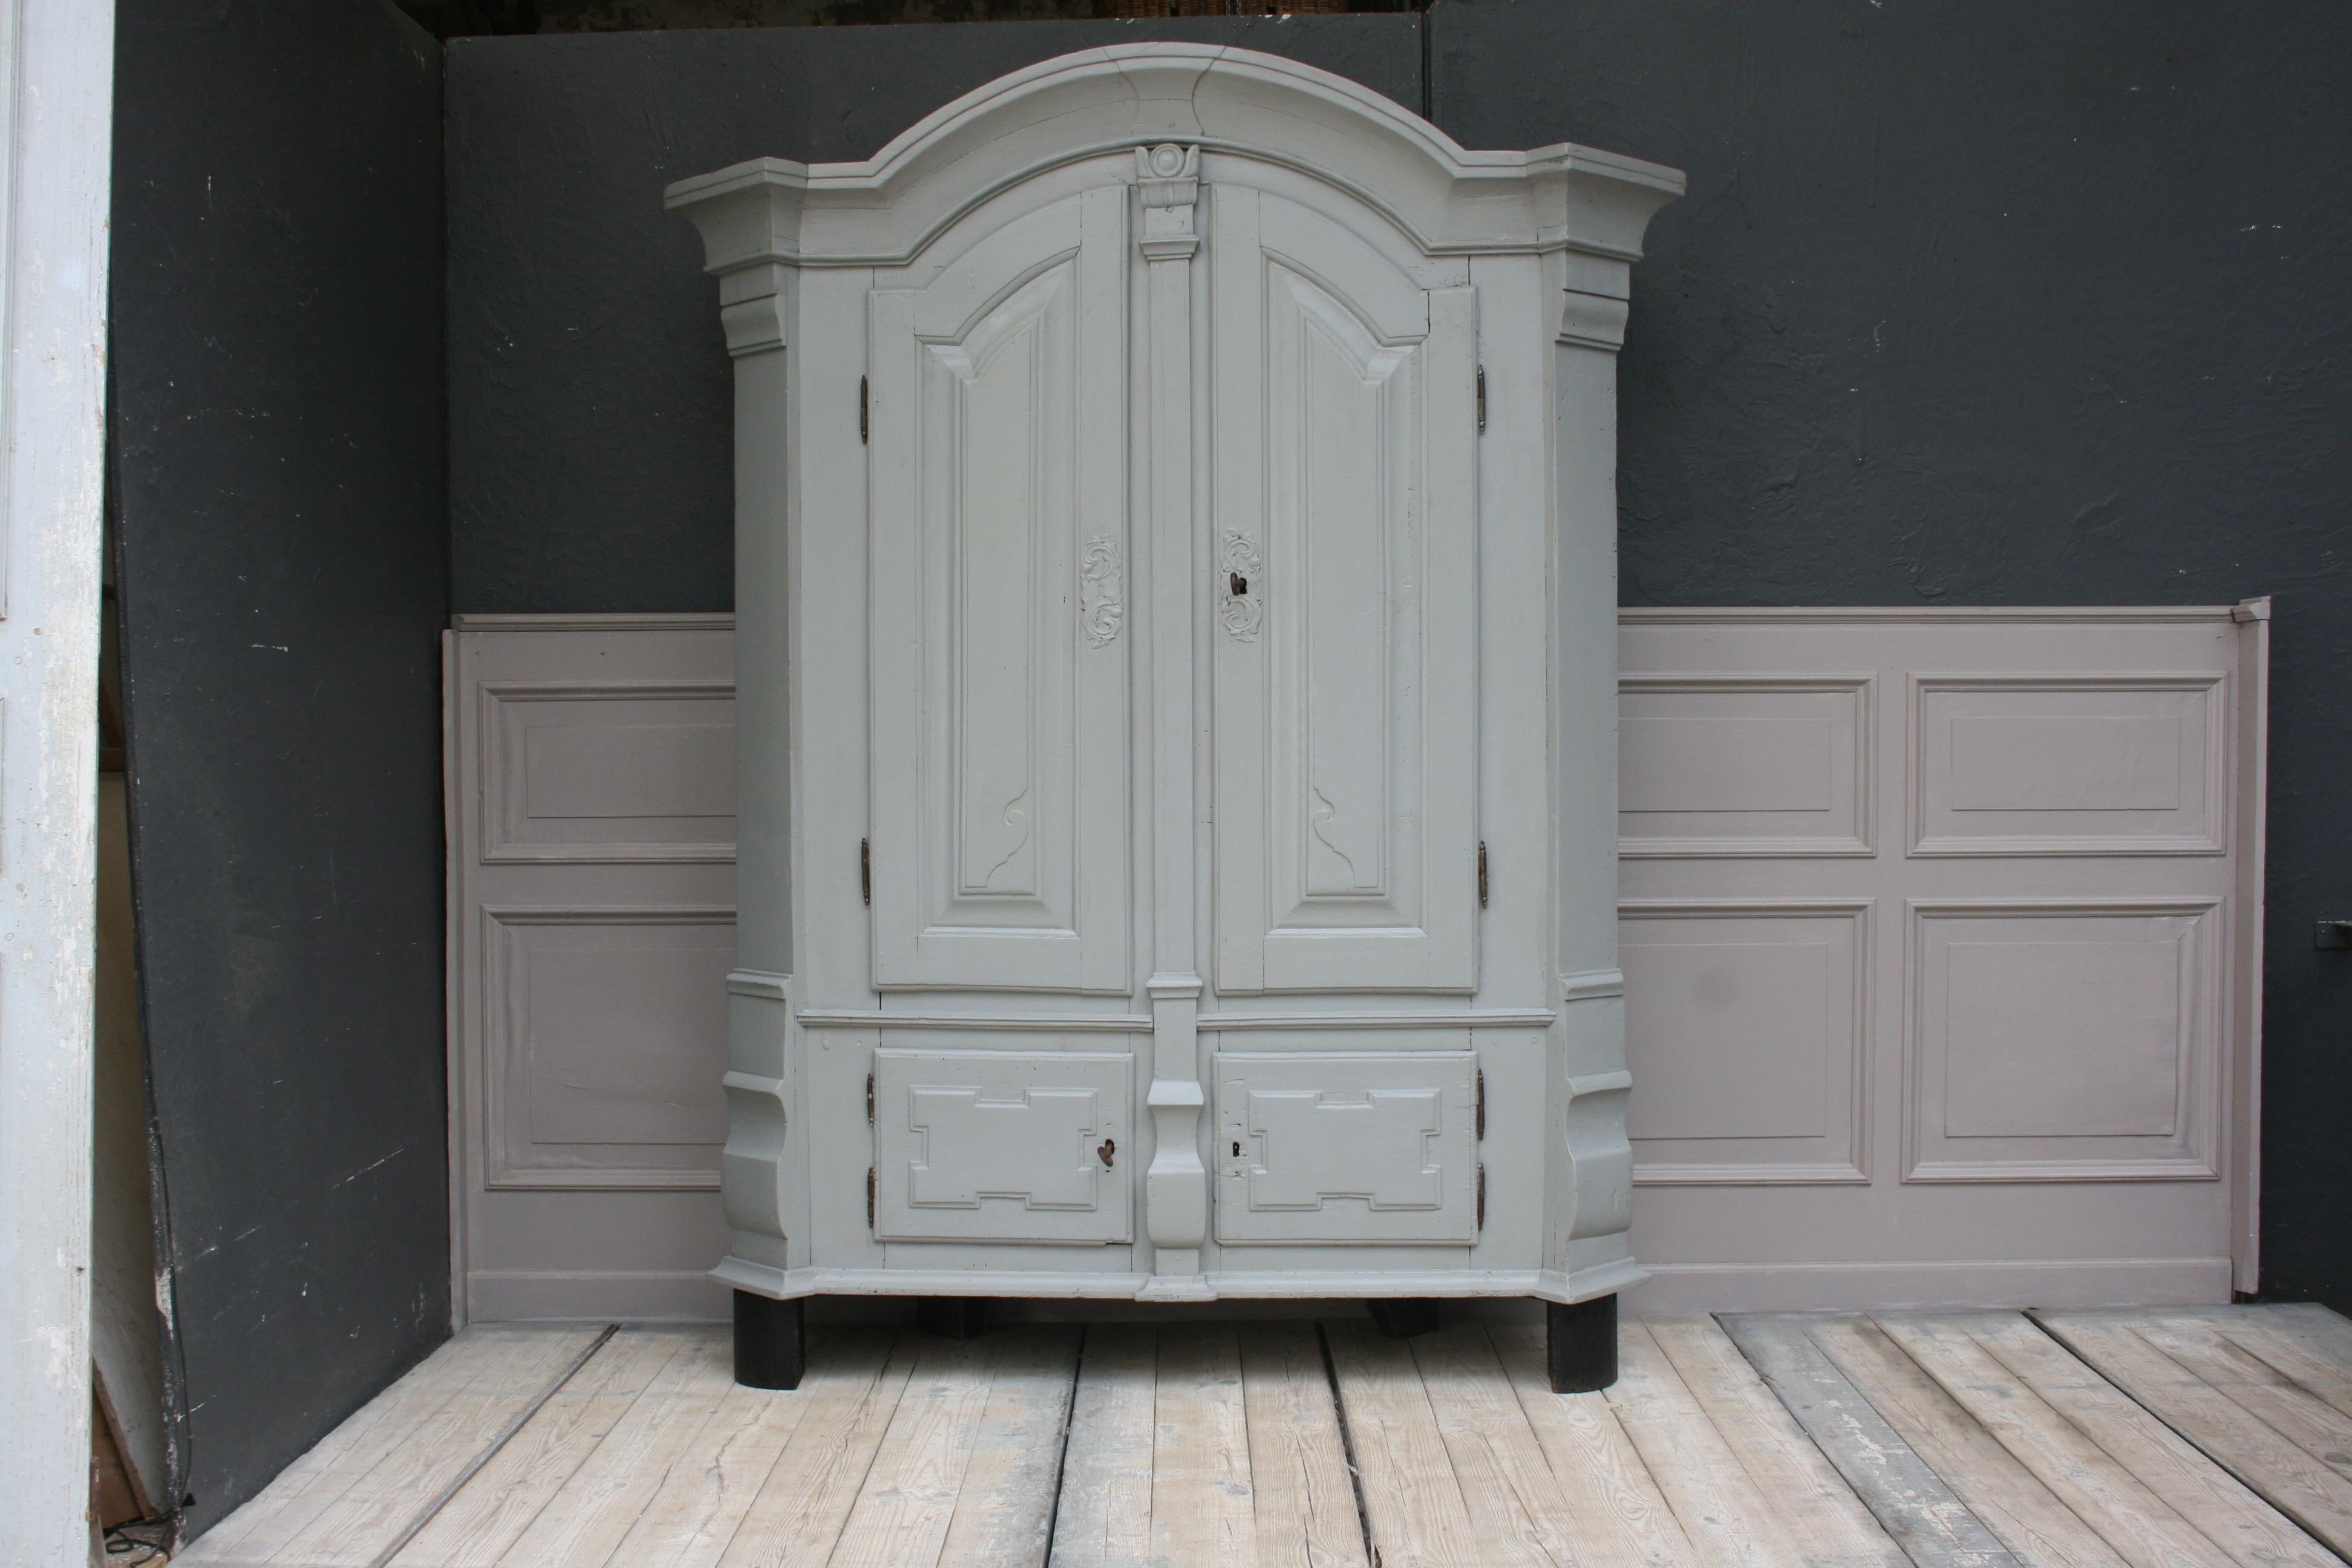 Antique South German (presumably Munich) baroque armoire from the 18th century made of pinewood.
Standing on 4 over-the-cornered ebonised feet with an arched cornice and cranked bevelled corners. High pedestal with 2 doors instead of drawers with